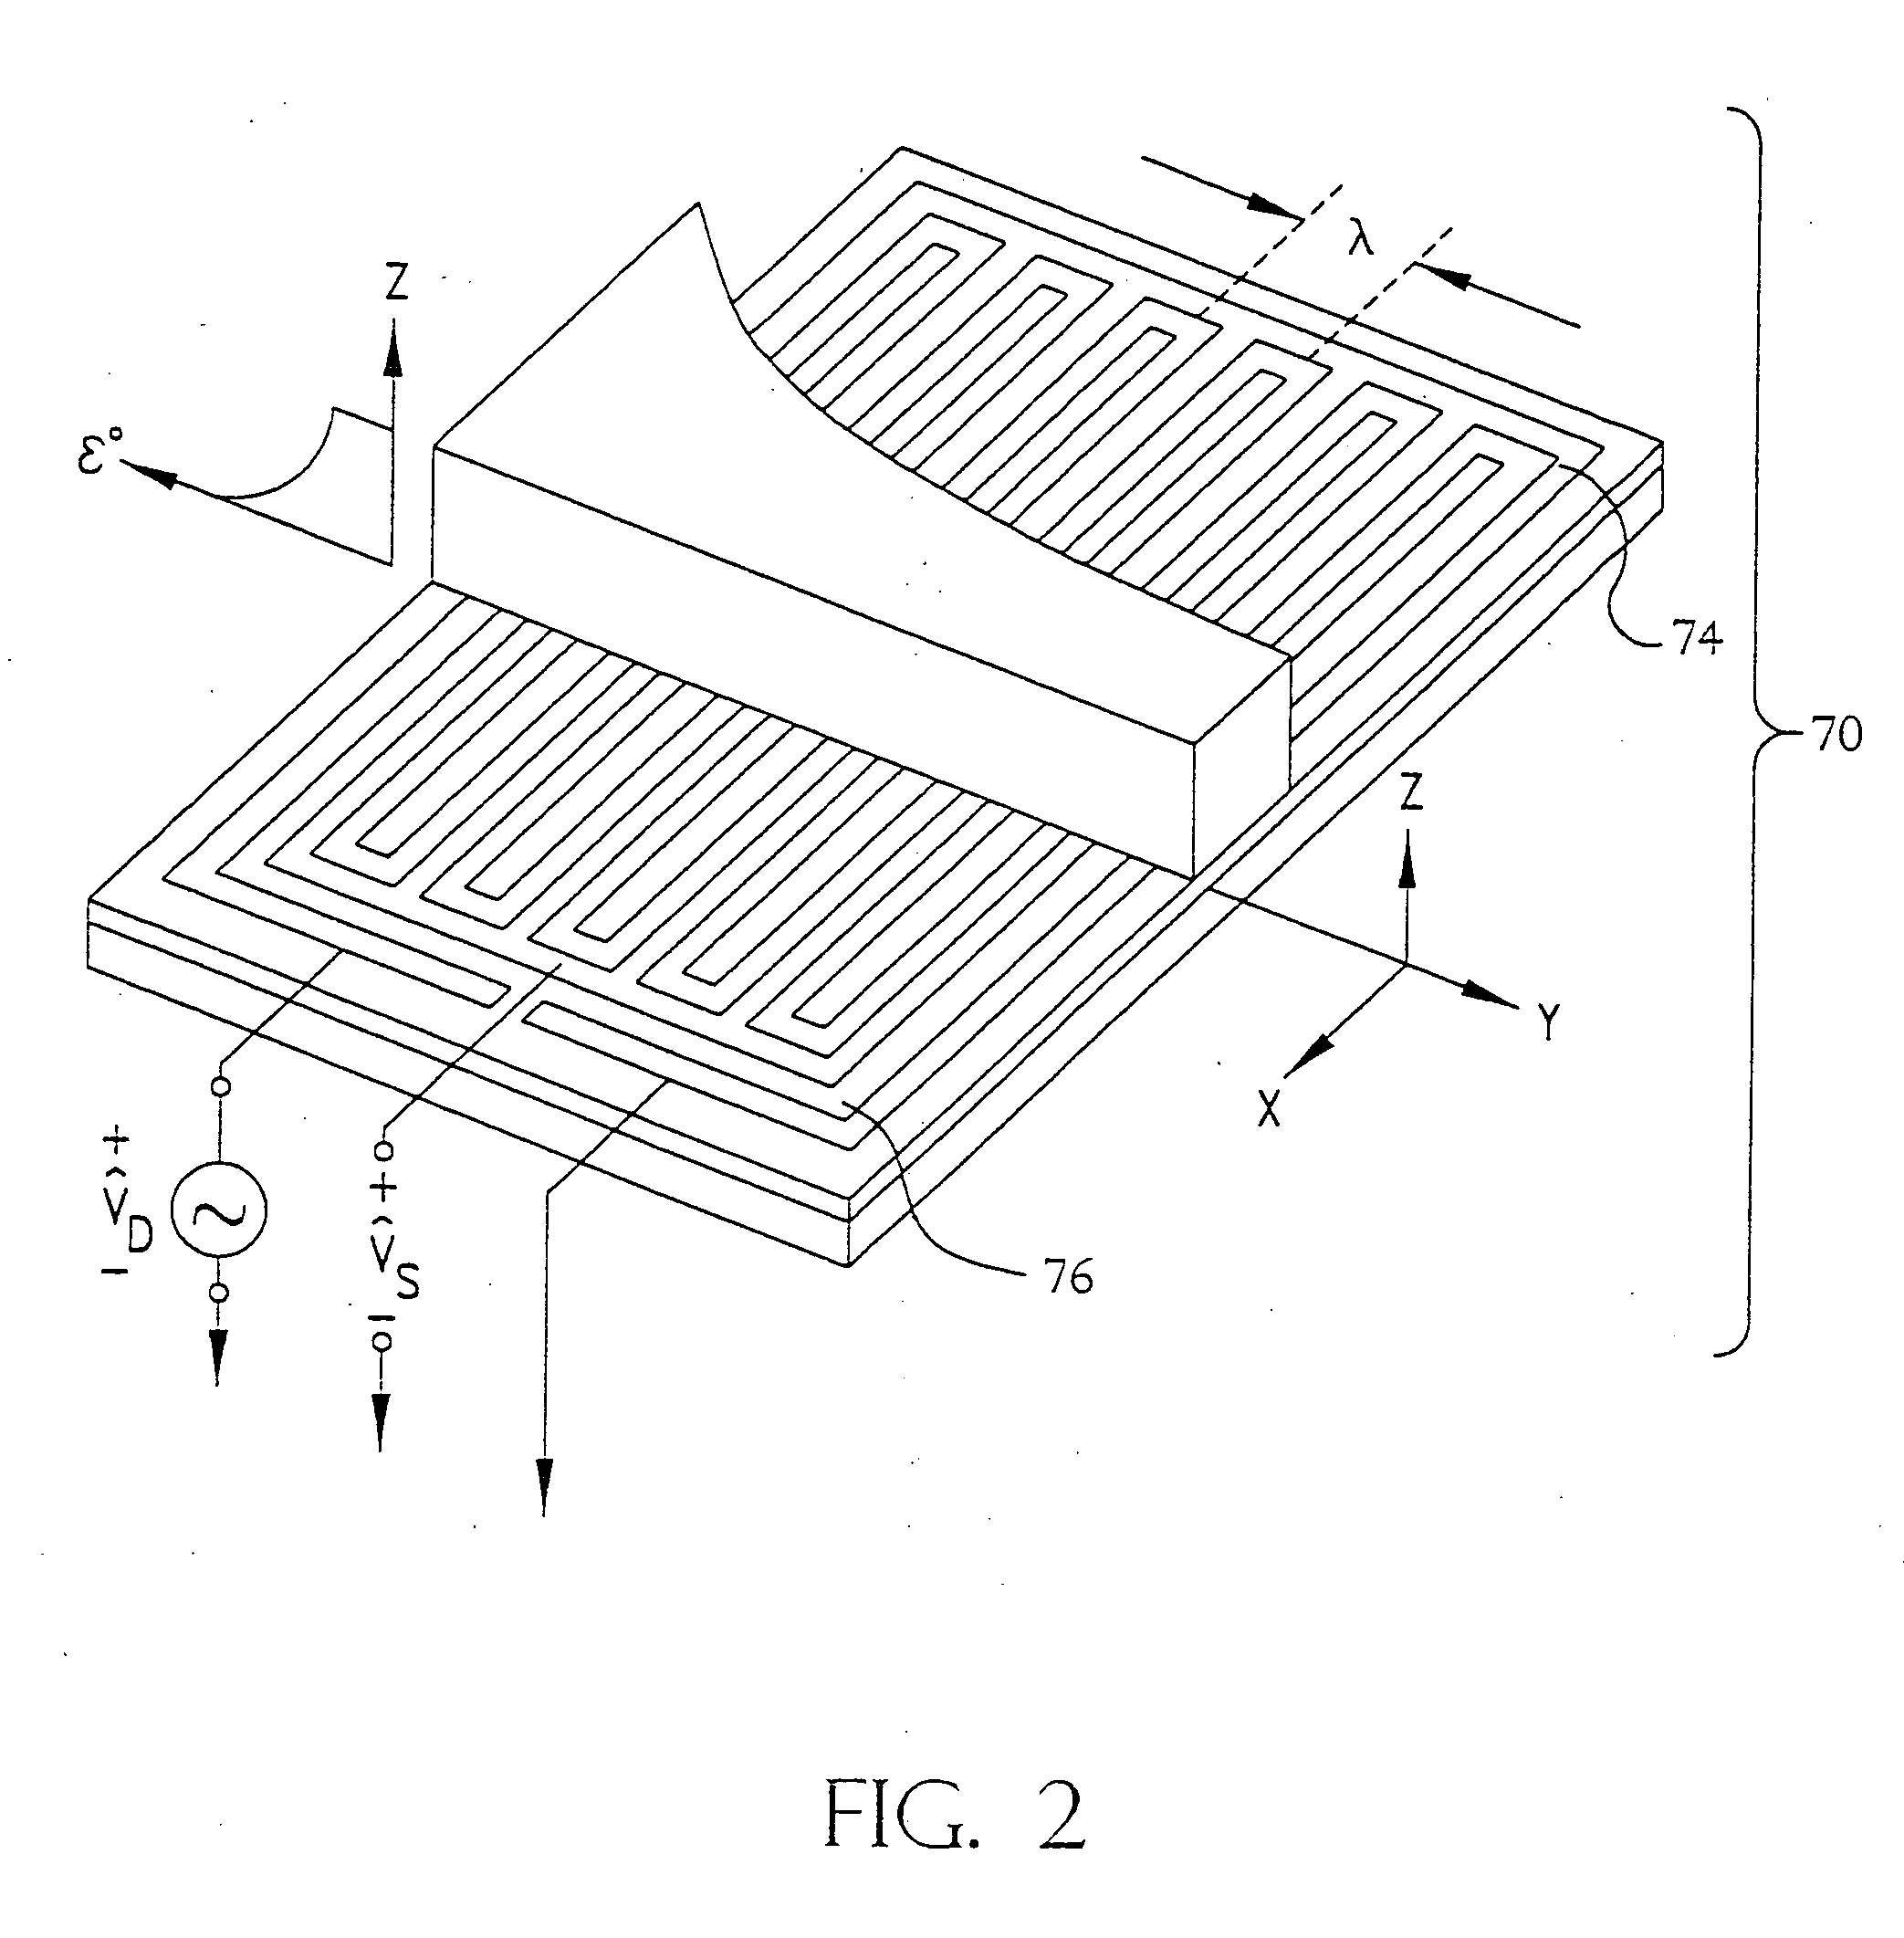 Methods for processing, optimization, calibration and display of measured dielectrometry signals using property estimation grids